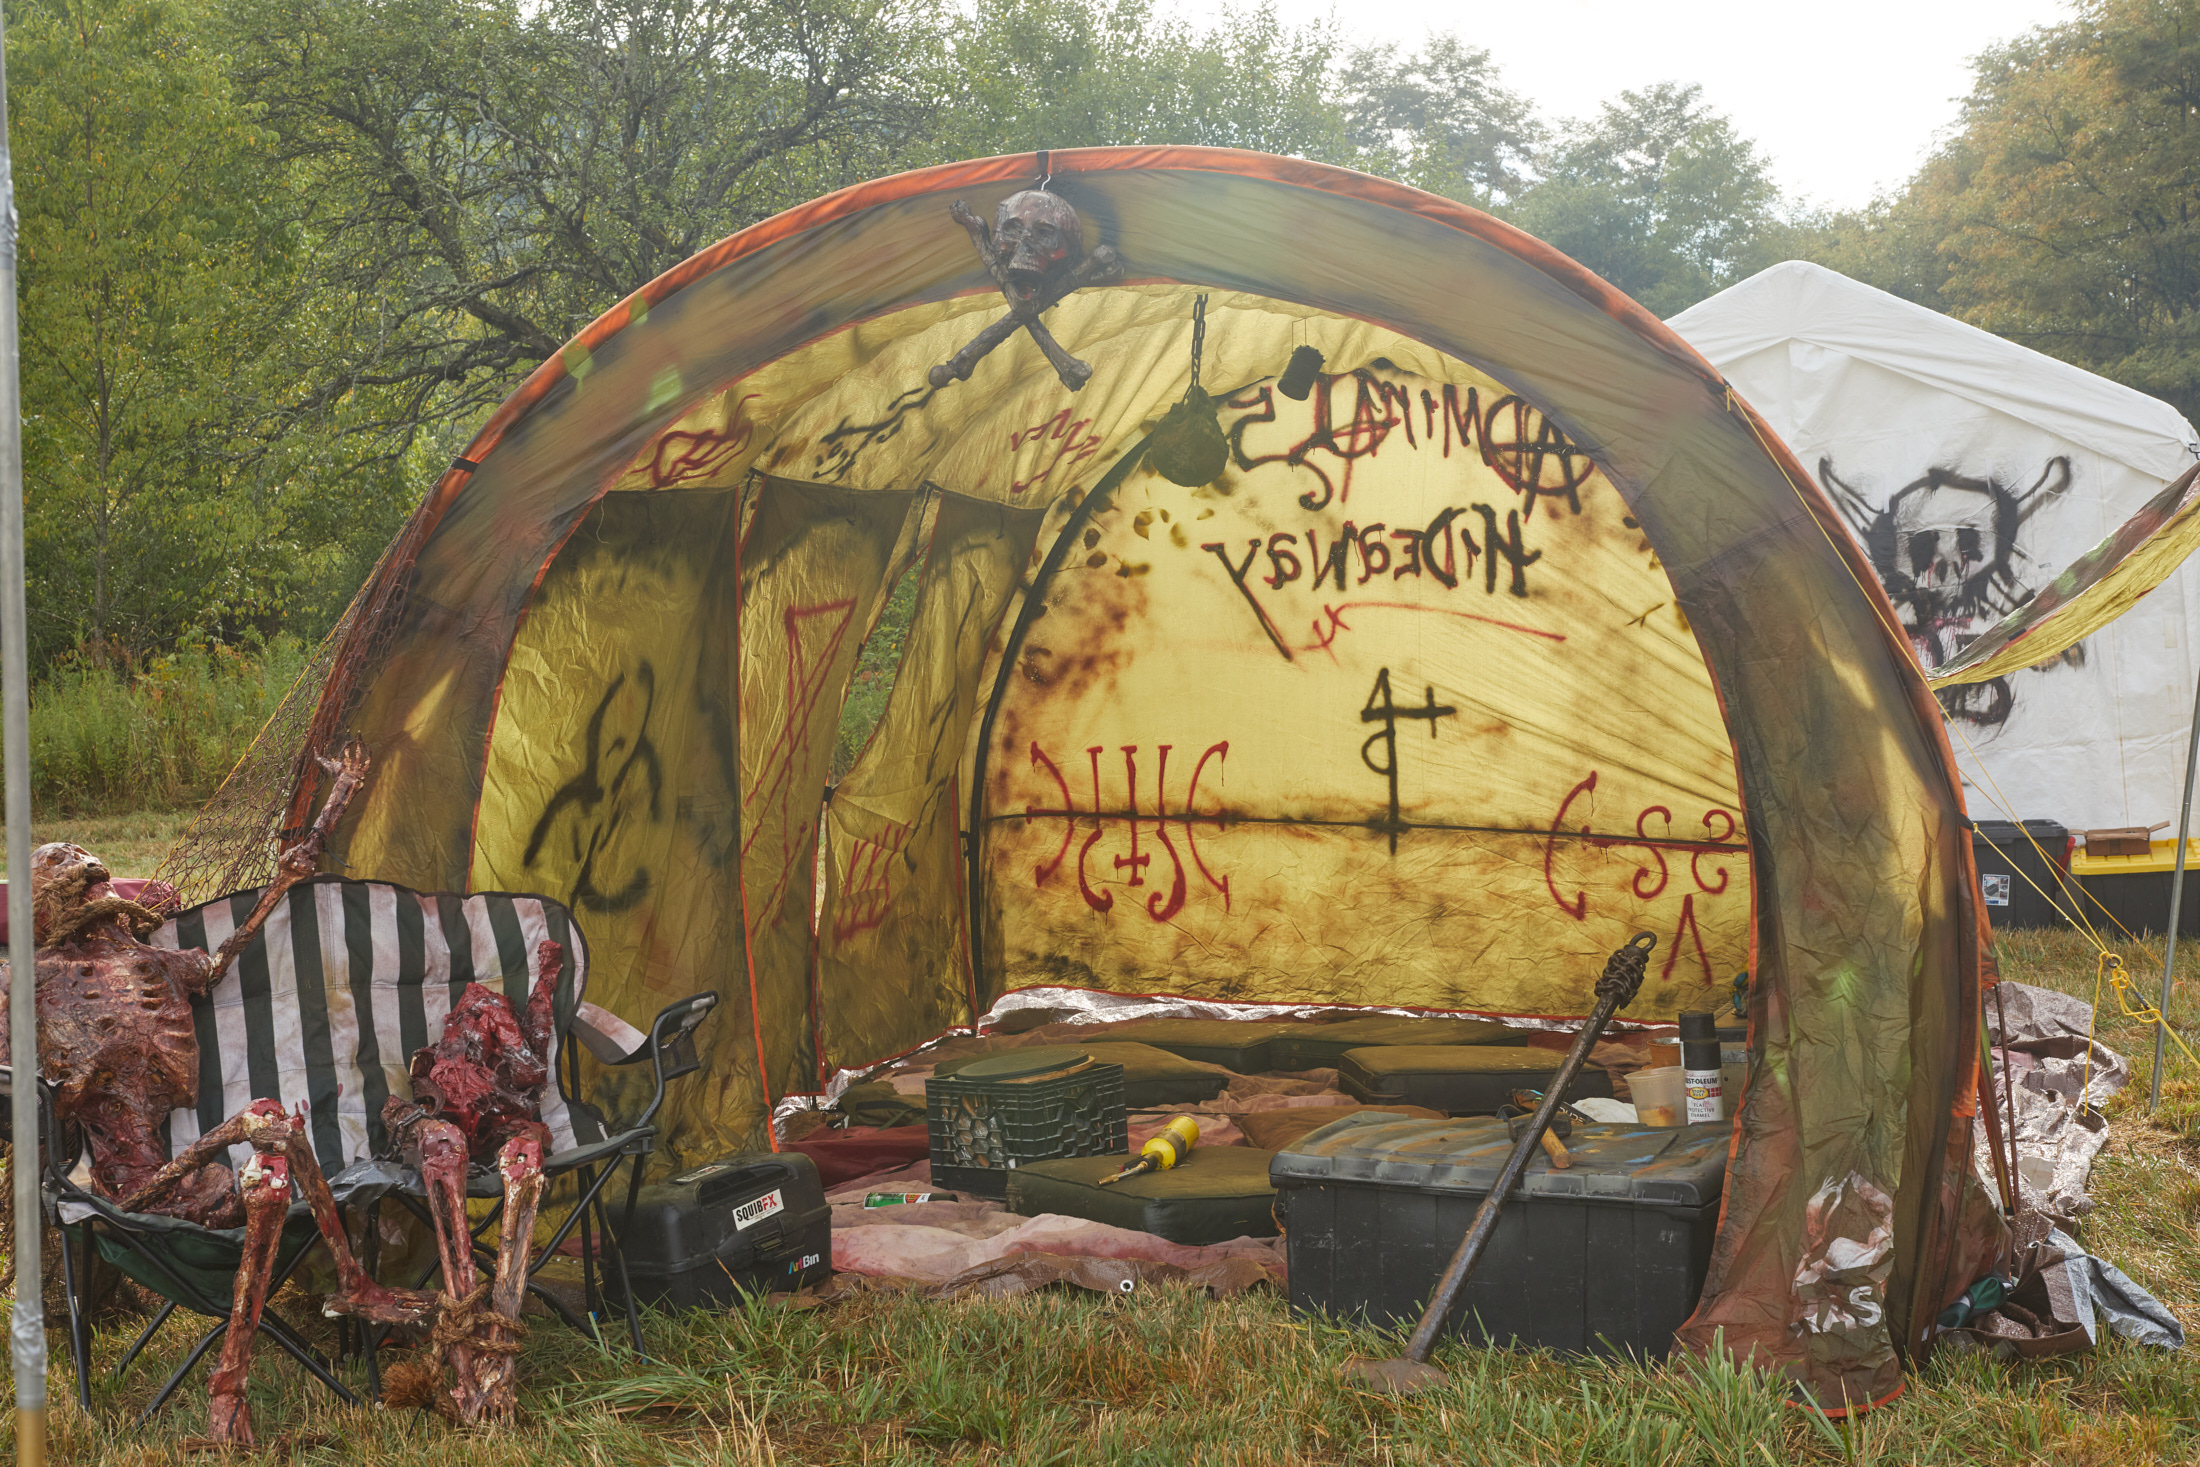 A post-apocalyptic themed tent with fake skeleton corpses sitting on a camping chair